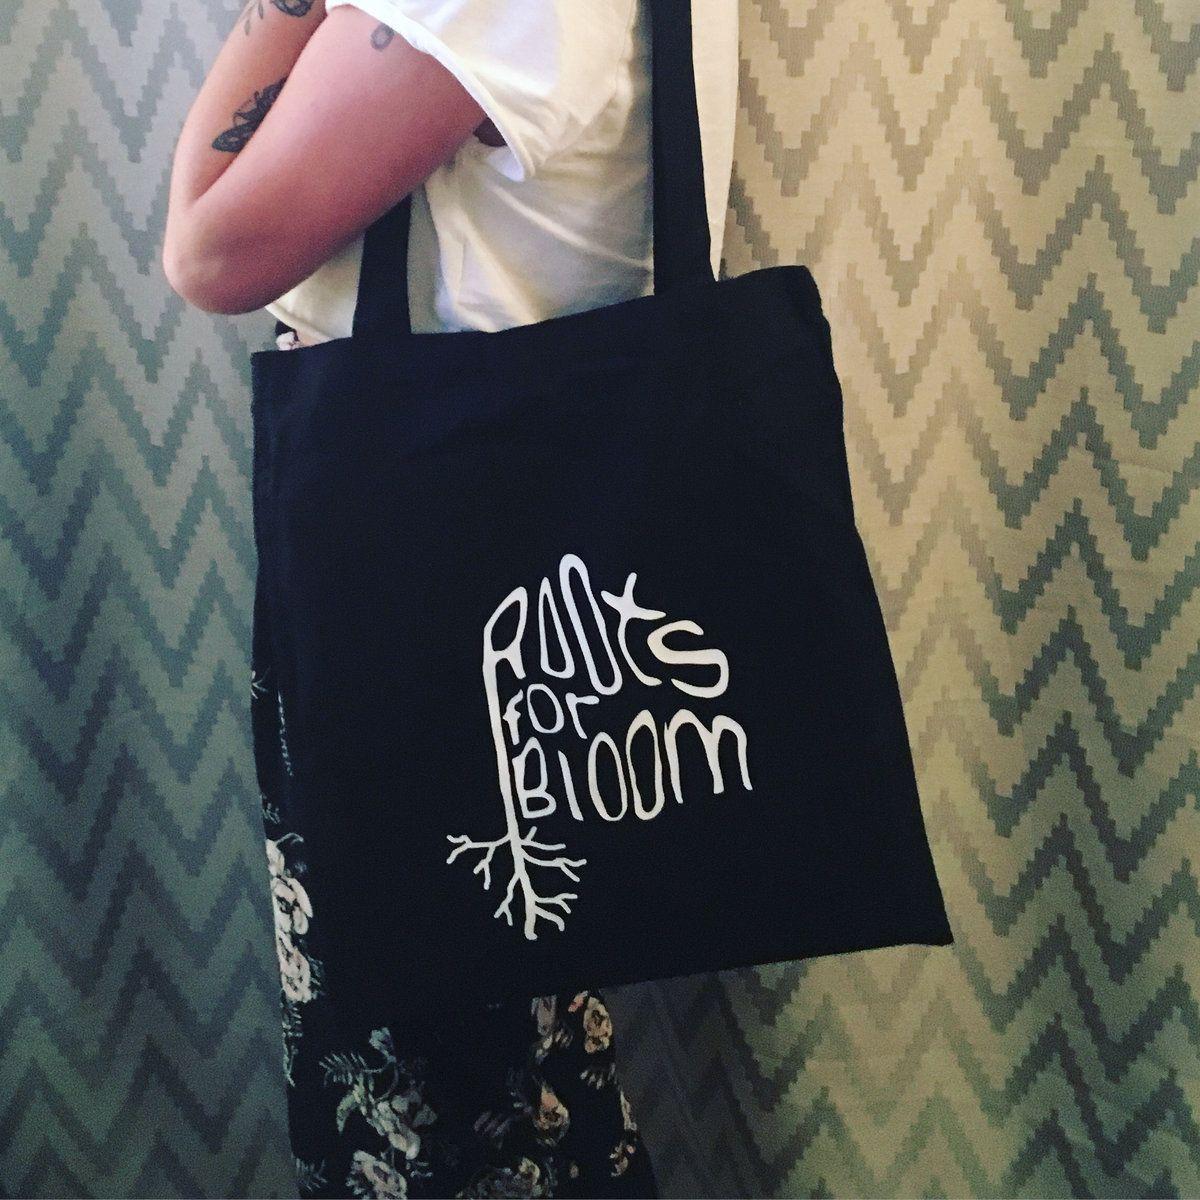 Red Roots Logo - Red Tote Bag w. Roots For Bloom Logo | Roots For Bloom